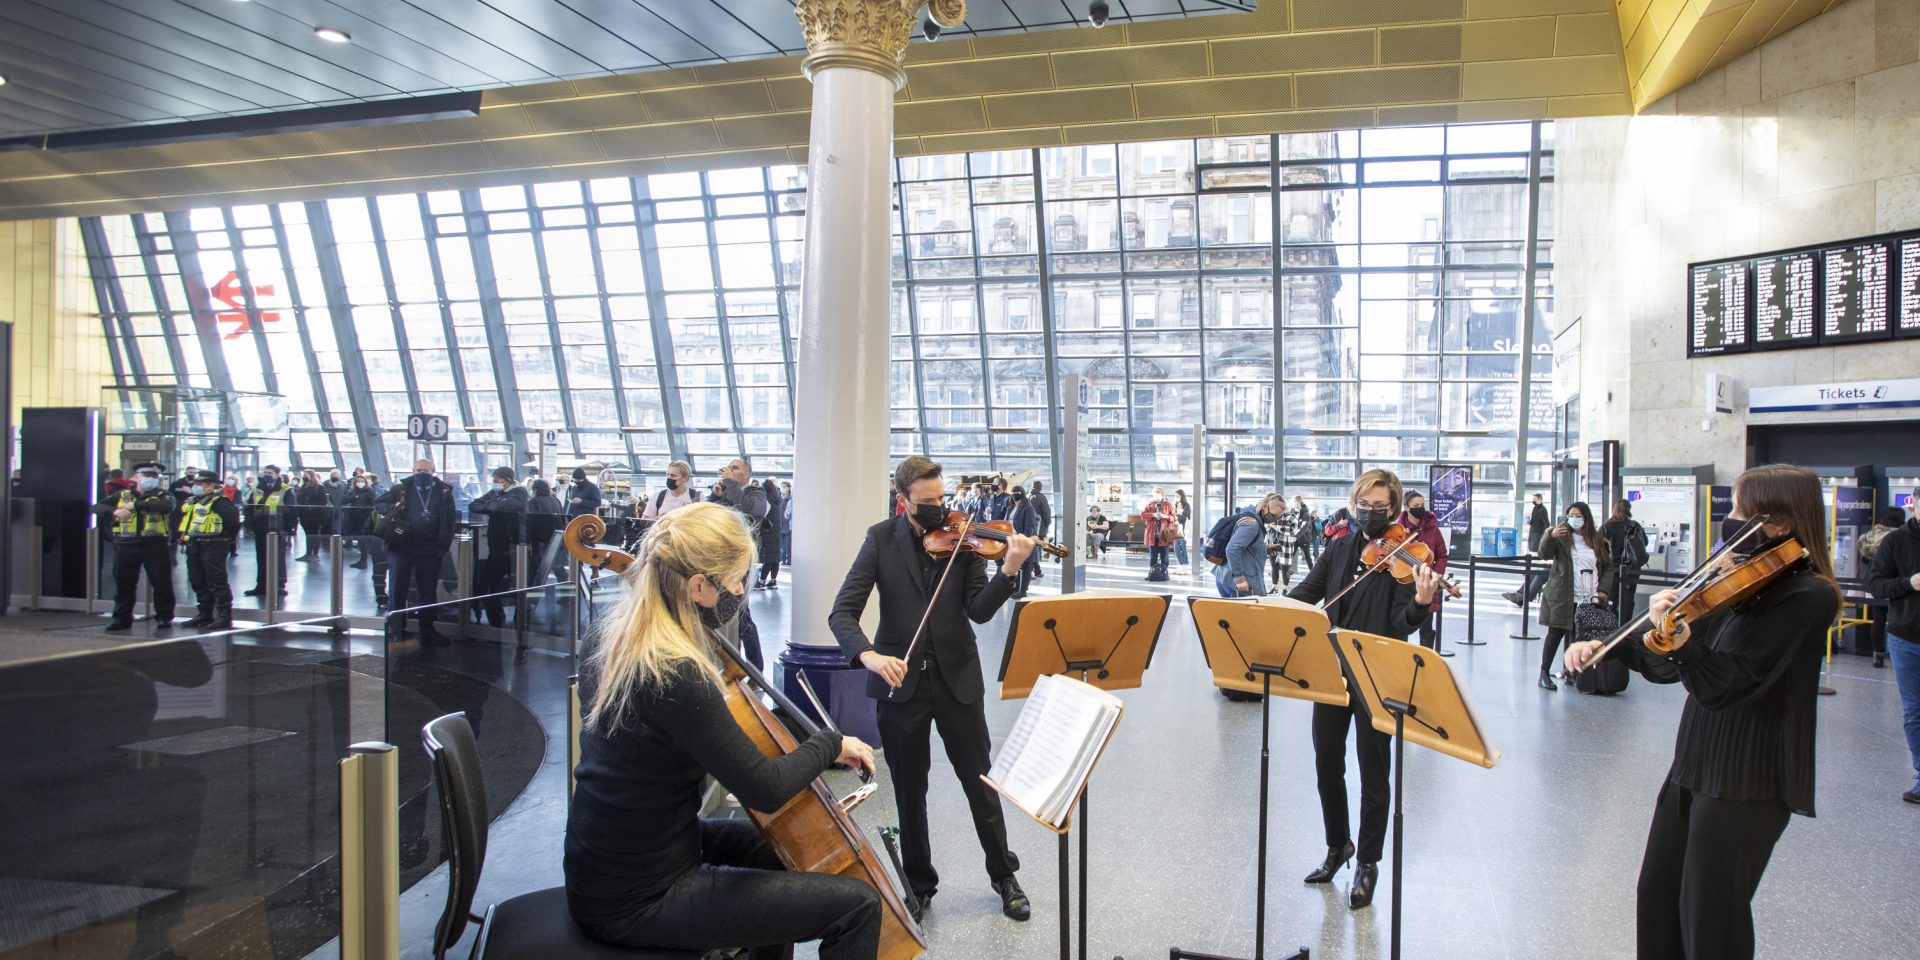 The RSNO celebrates the official opening of Glasgow’s new Queen Street Station